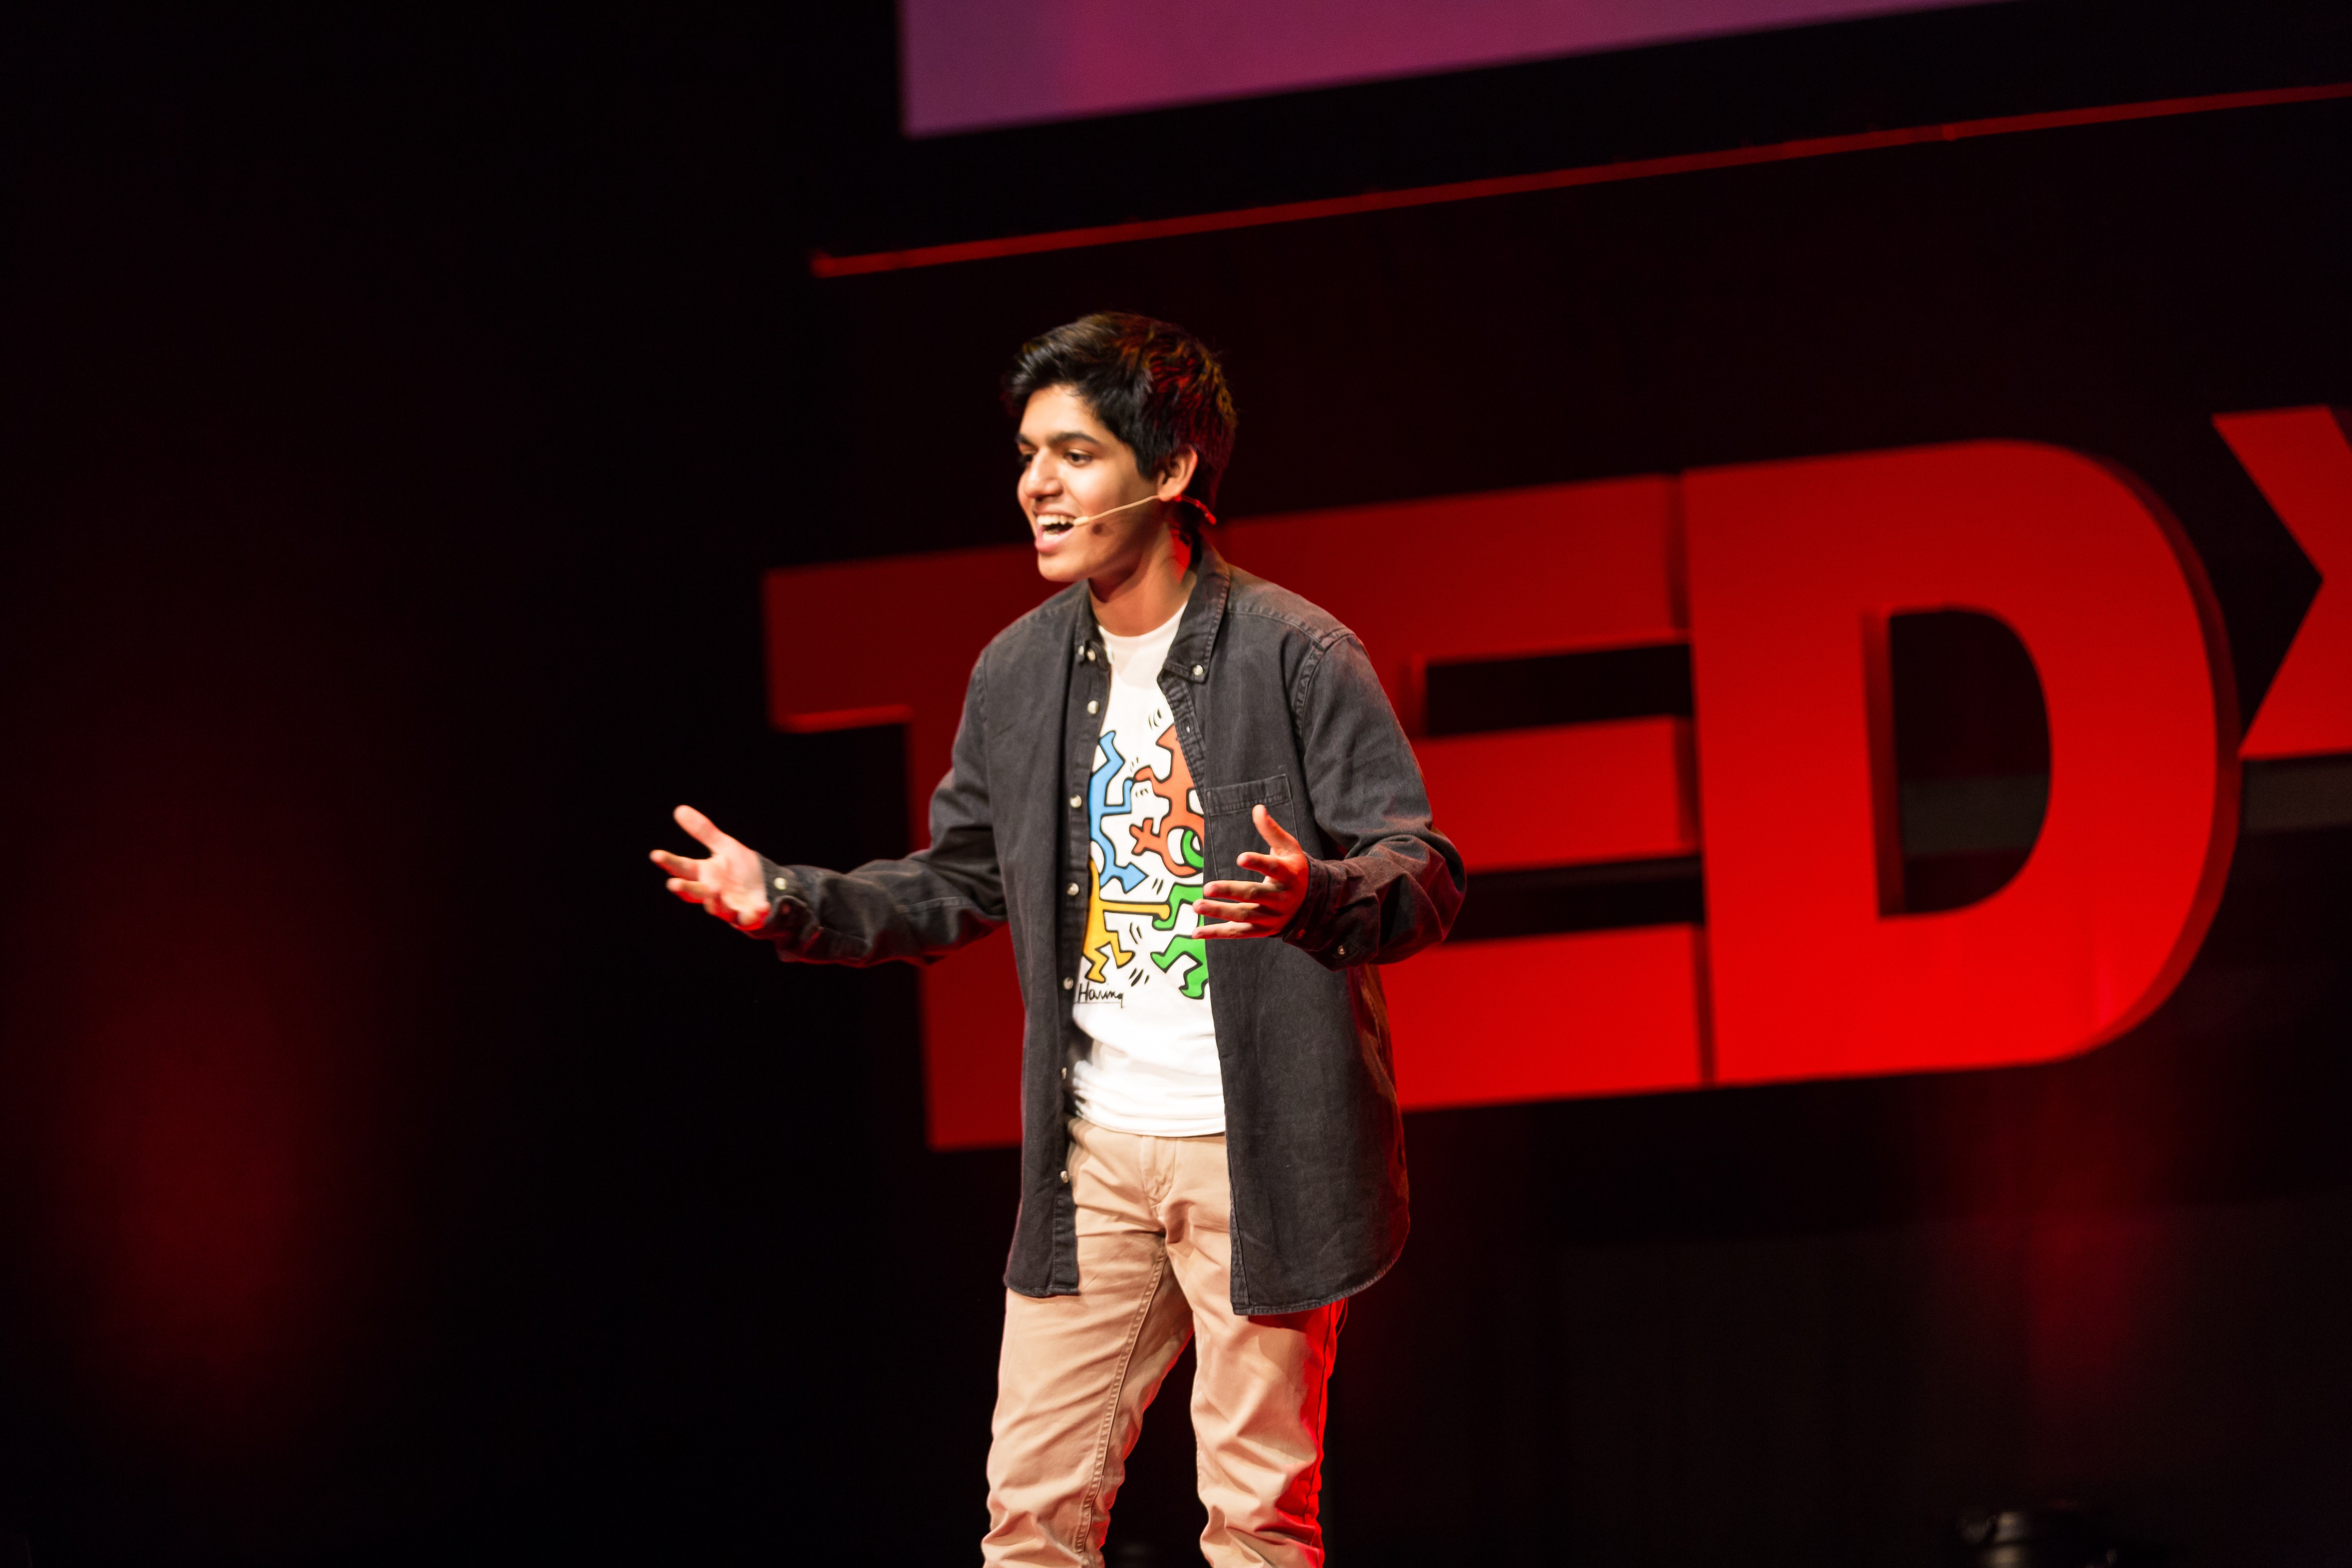 Whether they have graduated from university at the age of 13, spoken at TEDxTeen, or been able to name world’s 196 countries before starting school, these five prodigies hope to use their talents to make the world a better place